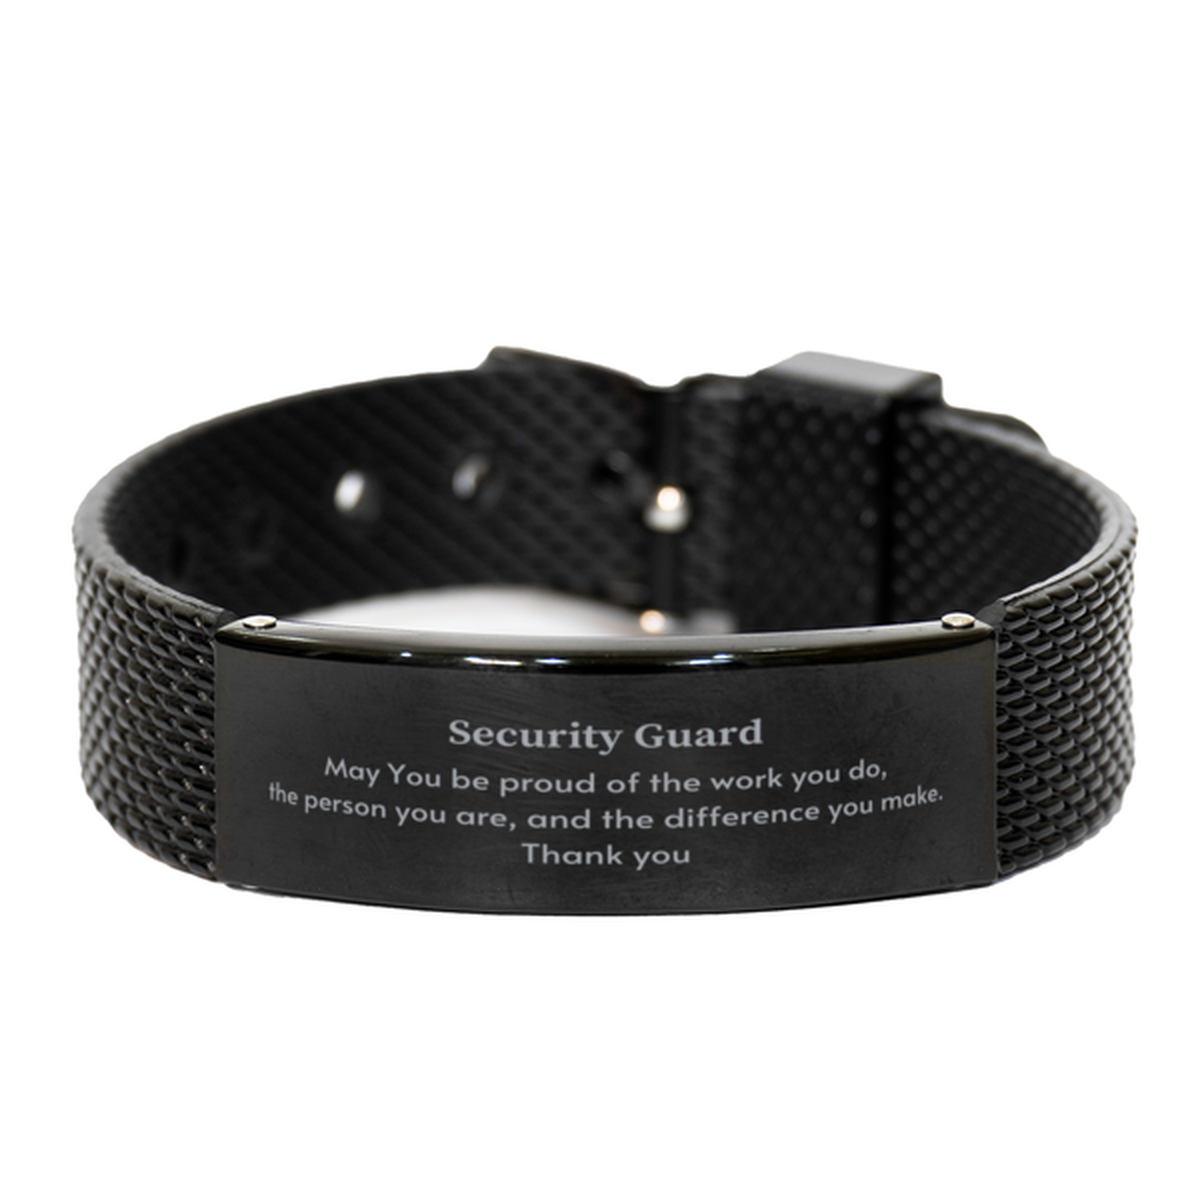 Heartwarming Black Shark Mesh Bracelet Retirement Coworkers Gifts for Security Guard, Security Guard May You be proud of the work you do, the person you are Gifts for Boss Men Women Friends